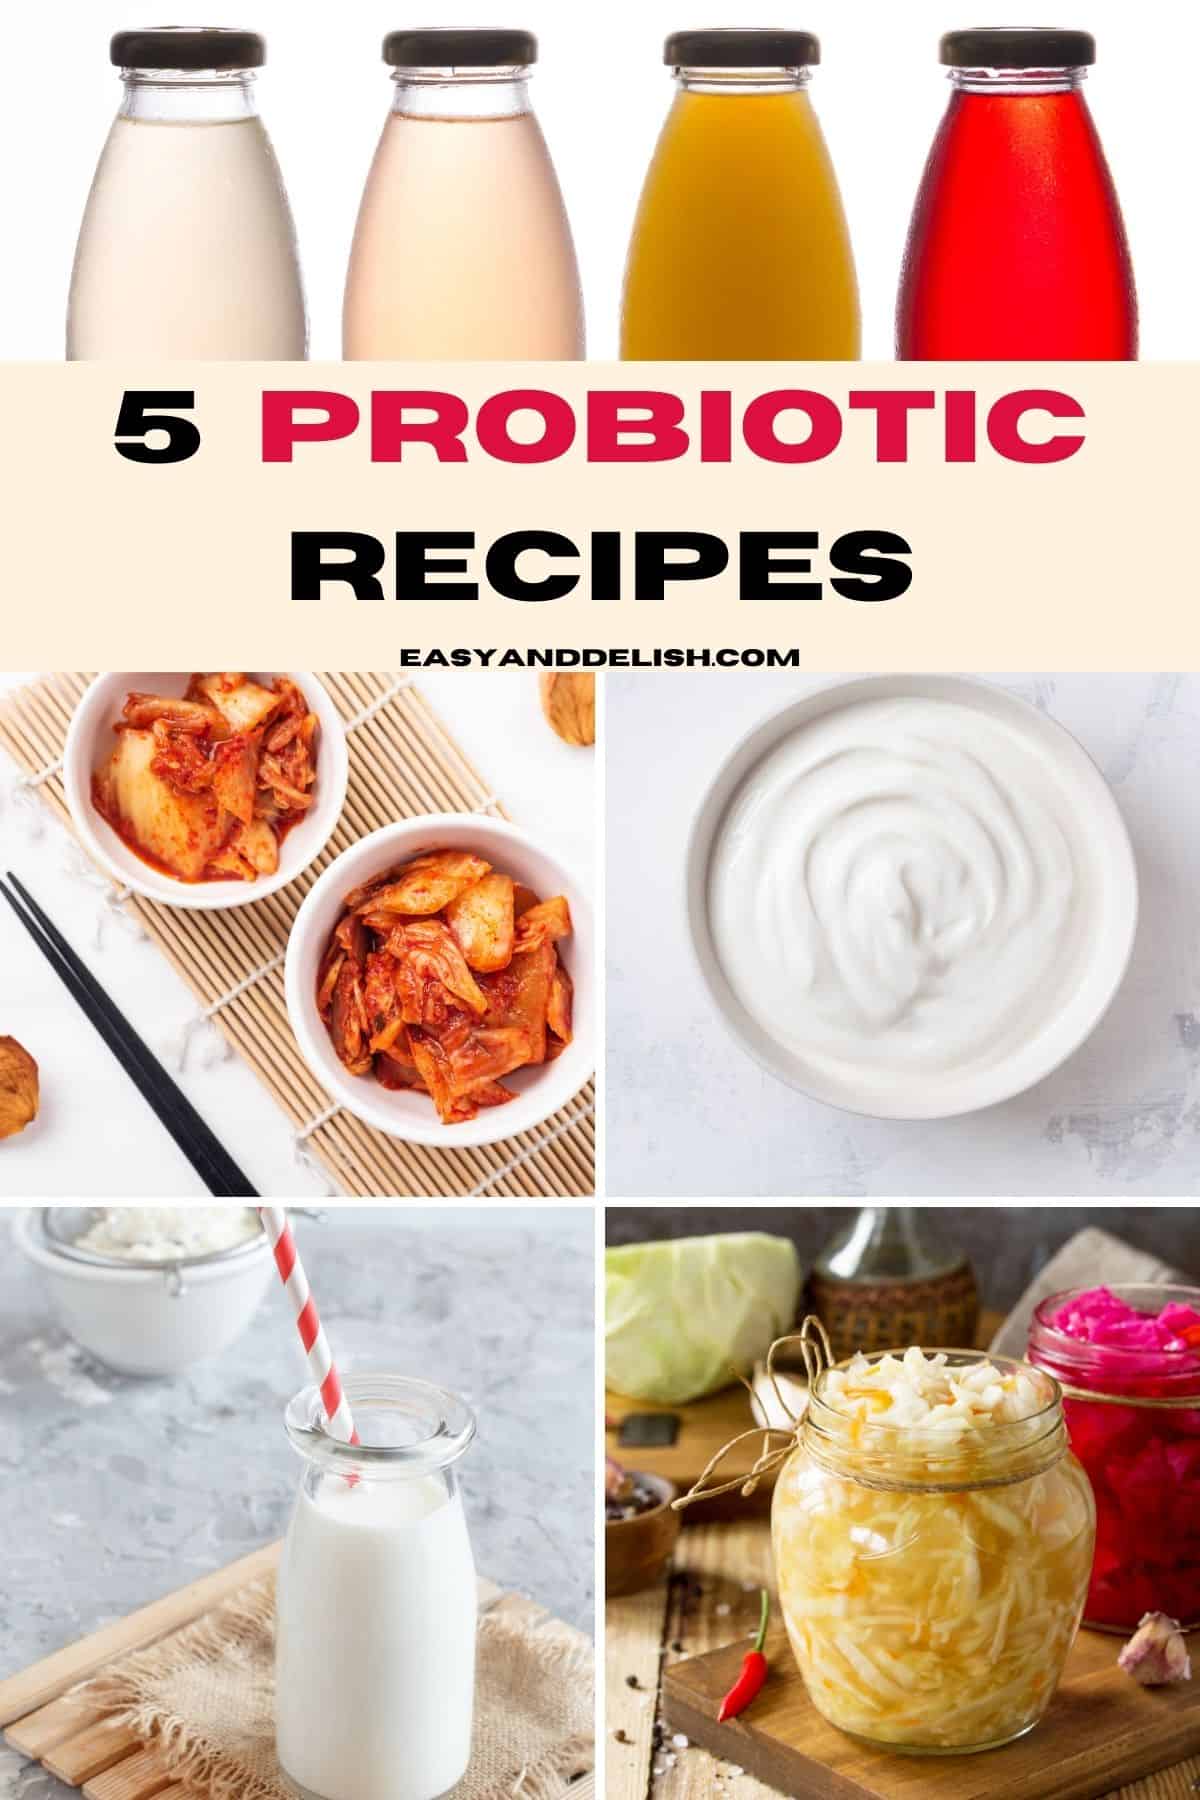 Collage shoing 5 probiotic recipes made at home. 